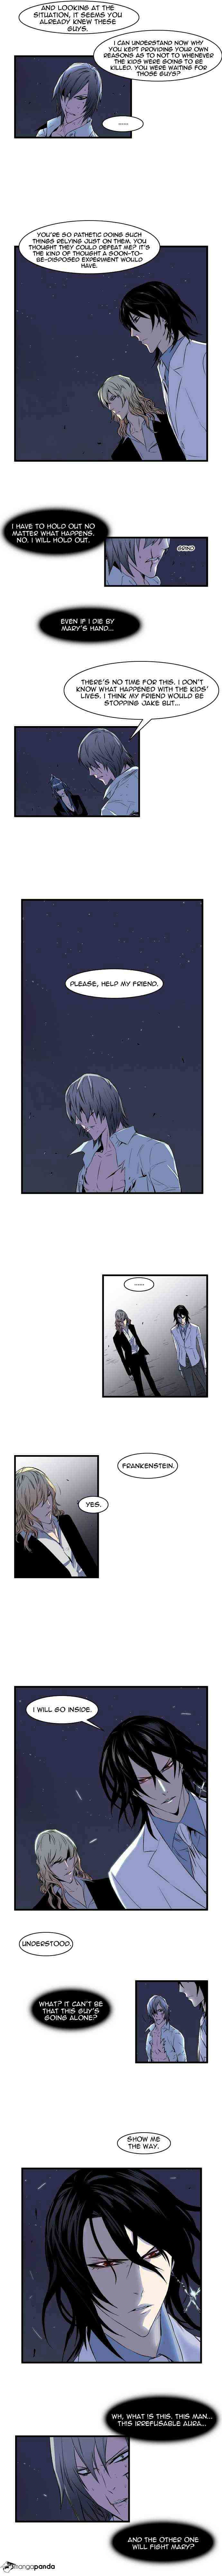 Noblesse Chapter 73 page 2